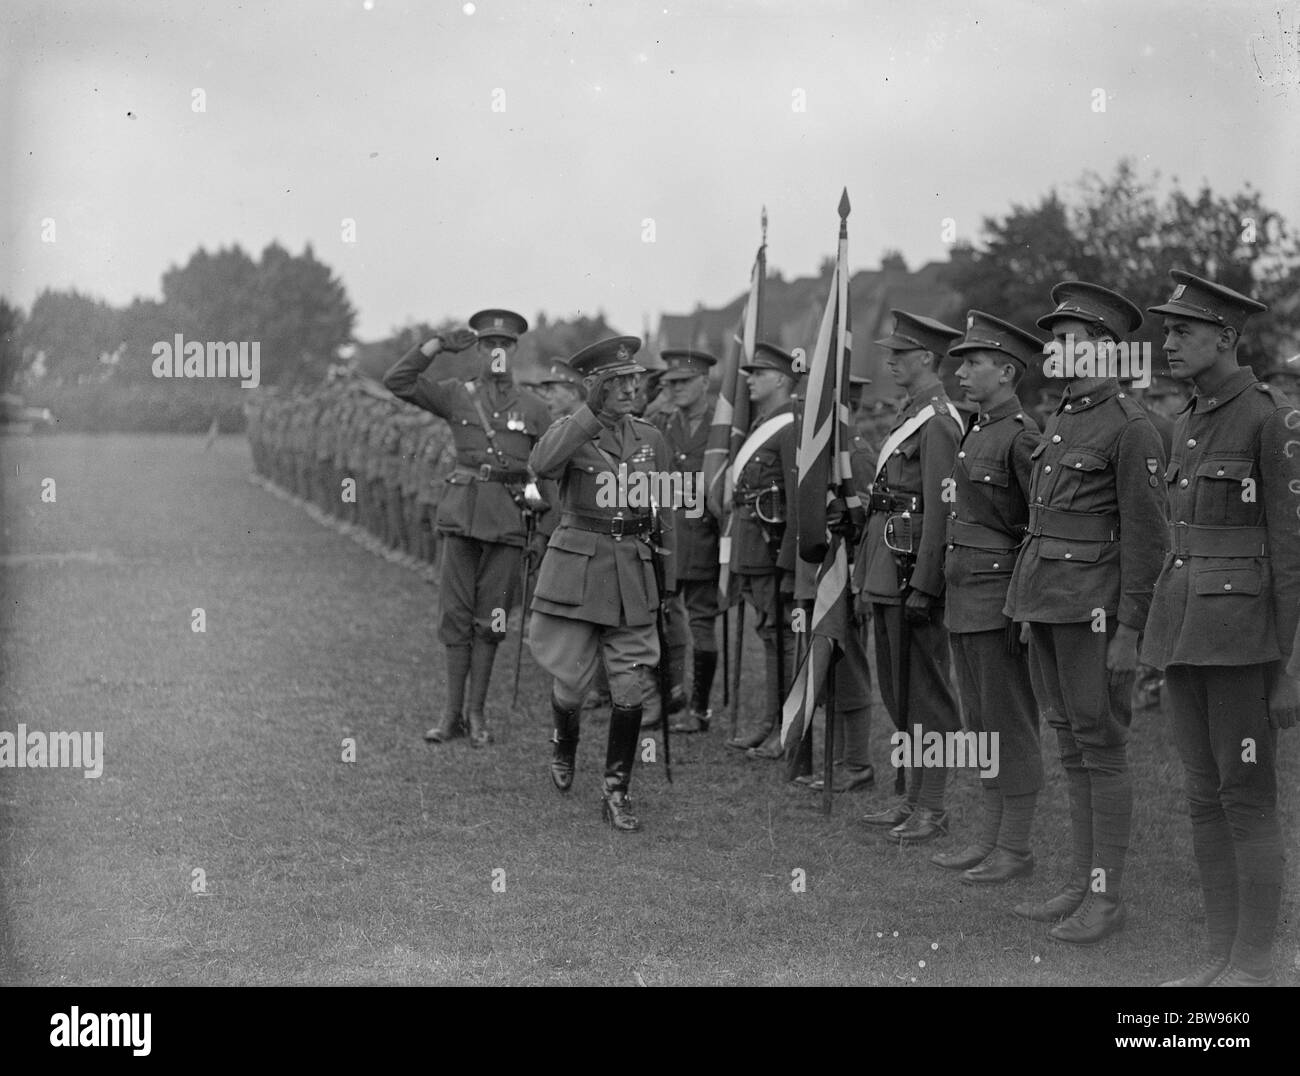 General Sir William Thwaites inspects Officer Training College at Battersea Grammer School prizegiving . General Sir William Thwaites Director General of territorial Army , inspected the Officers Training Corps of the Battersea Grammers School , at their sports grounds at Wandsworth . General Sir William Thwaites , inspecting the OTC at Wandsworth . 18 July 1932 Stock Photo